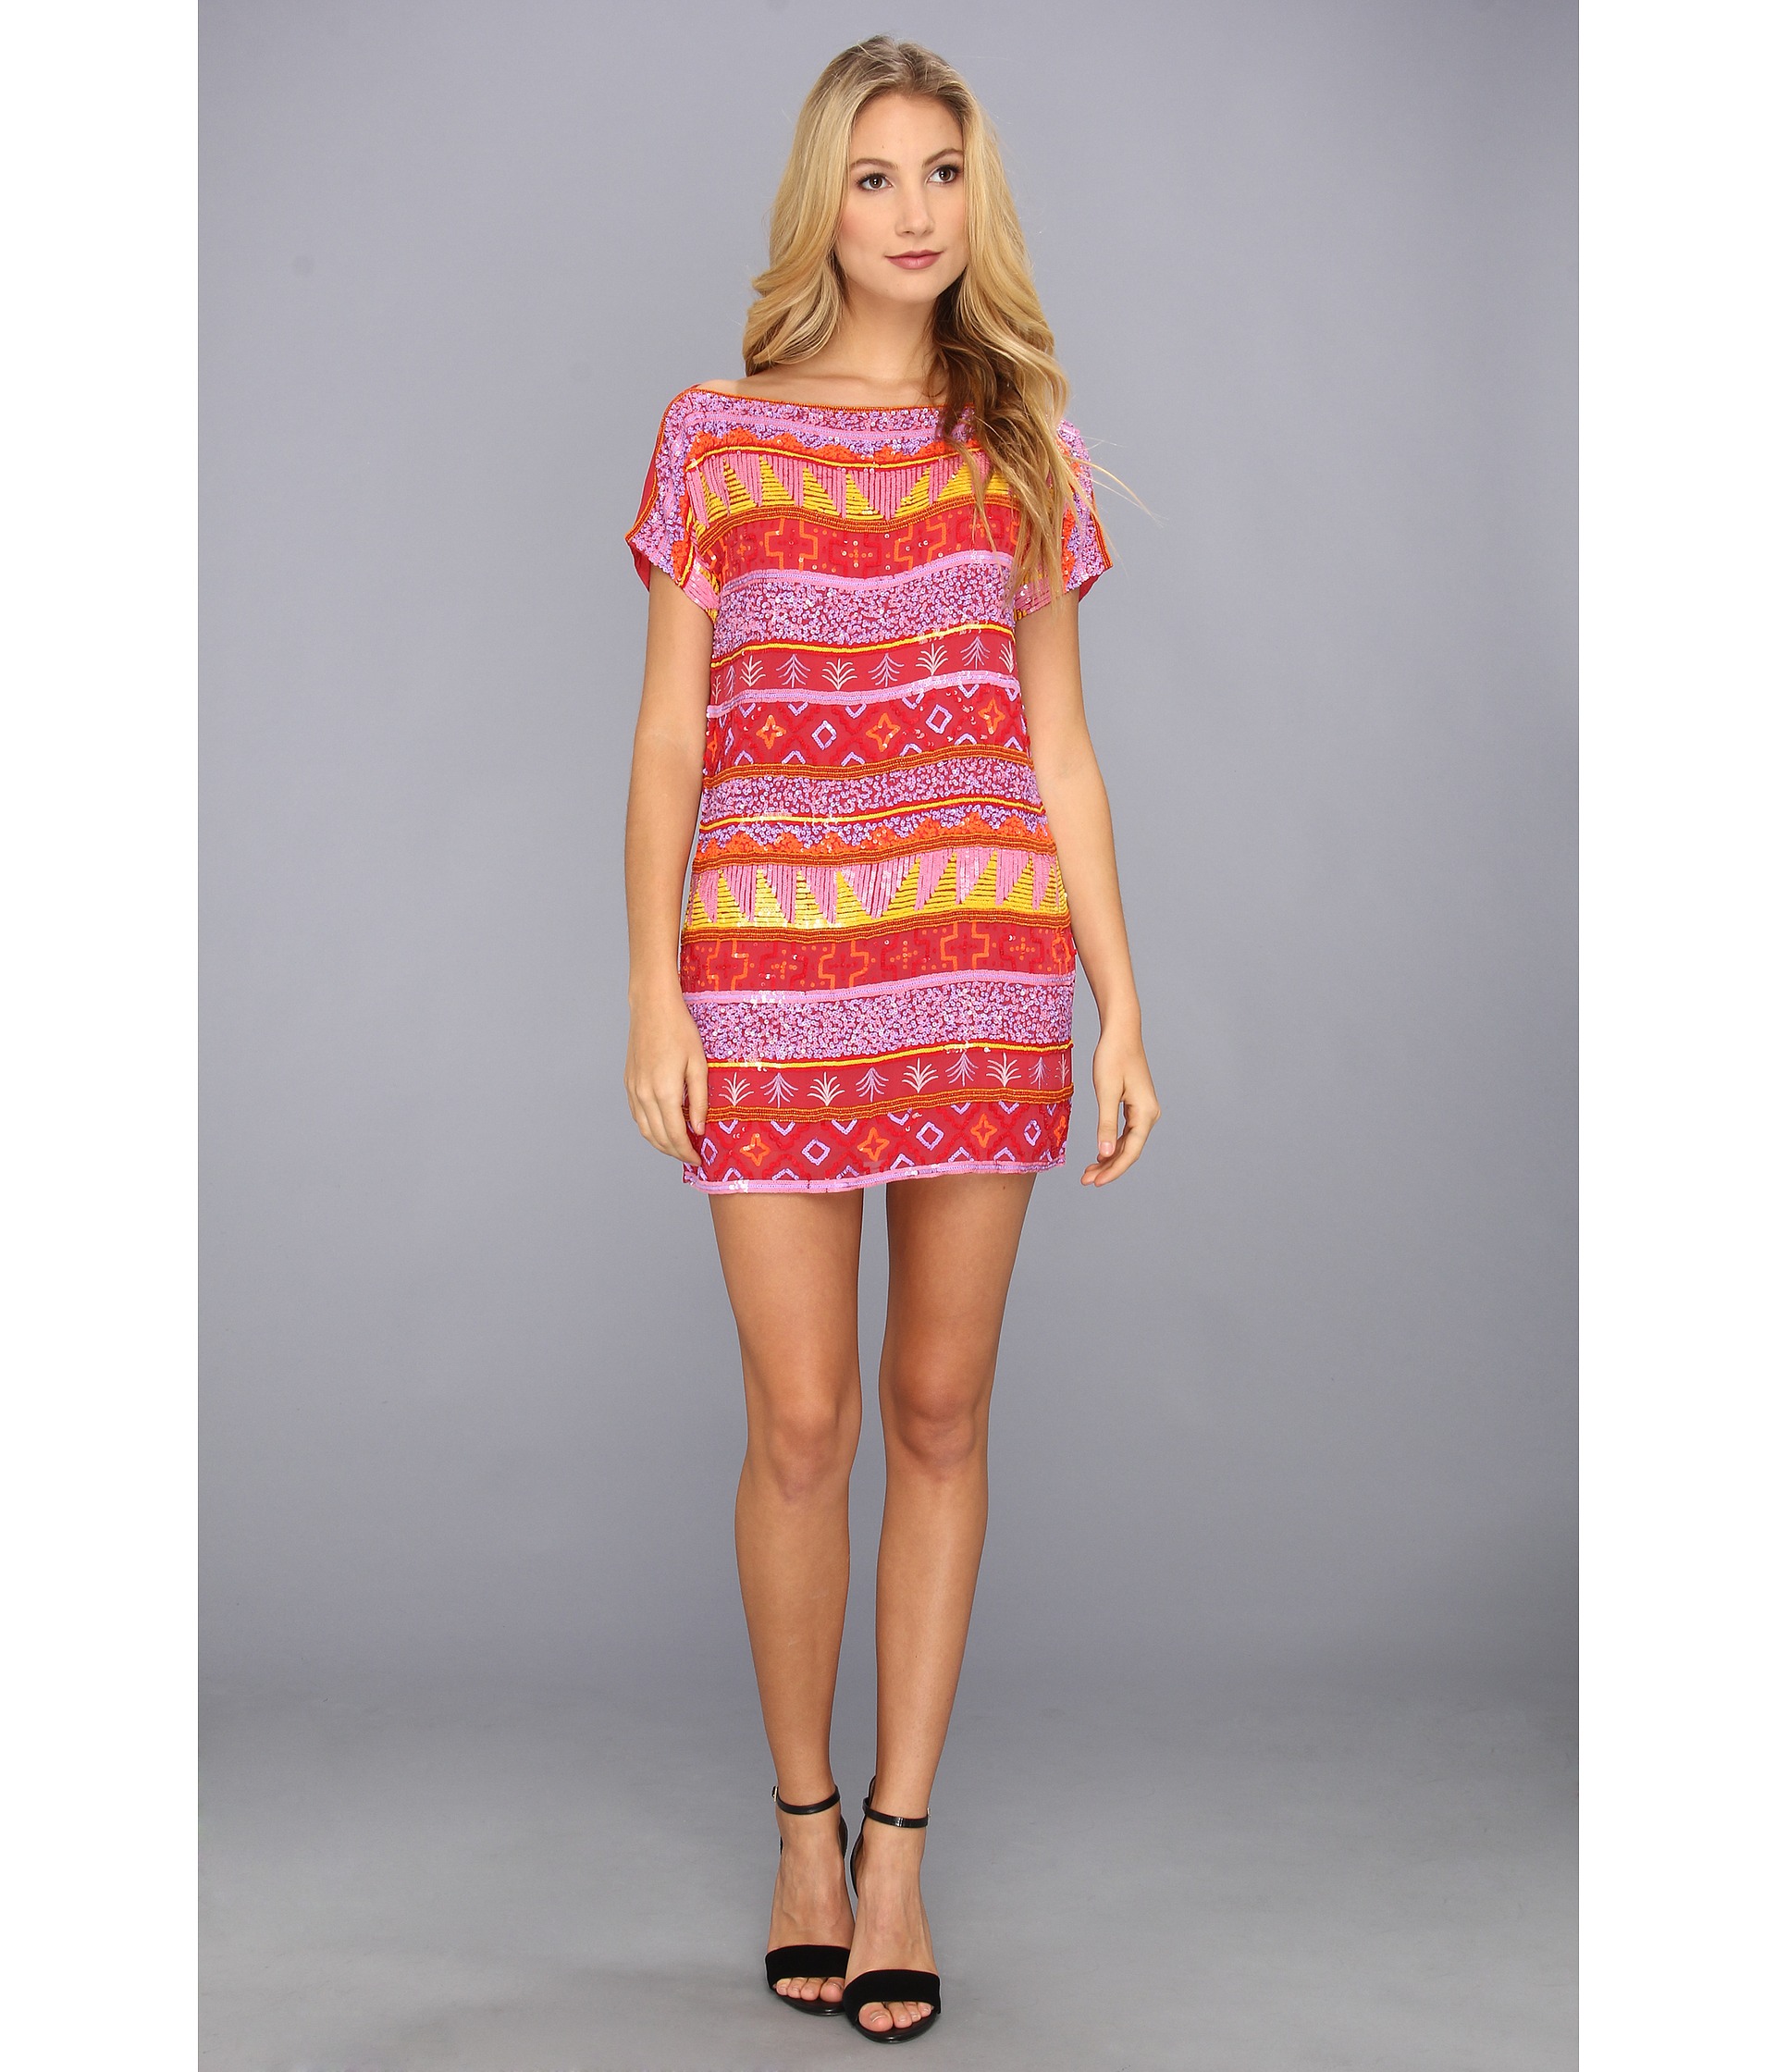 Tbags Los Angeles Aztec Sequin Embellished Mini Dress